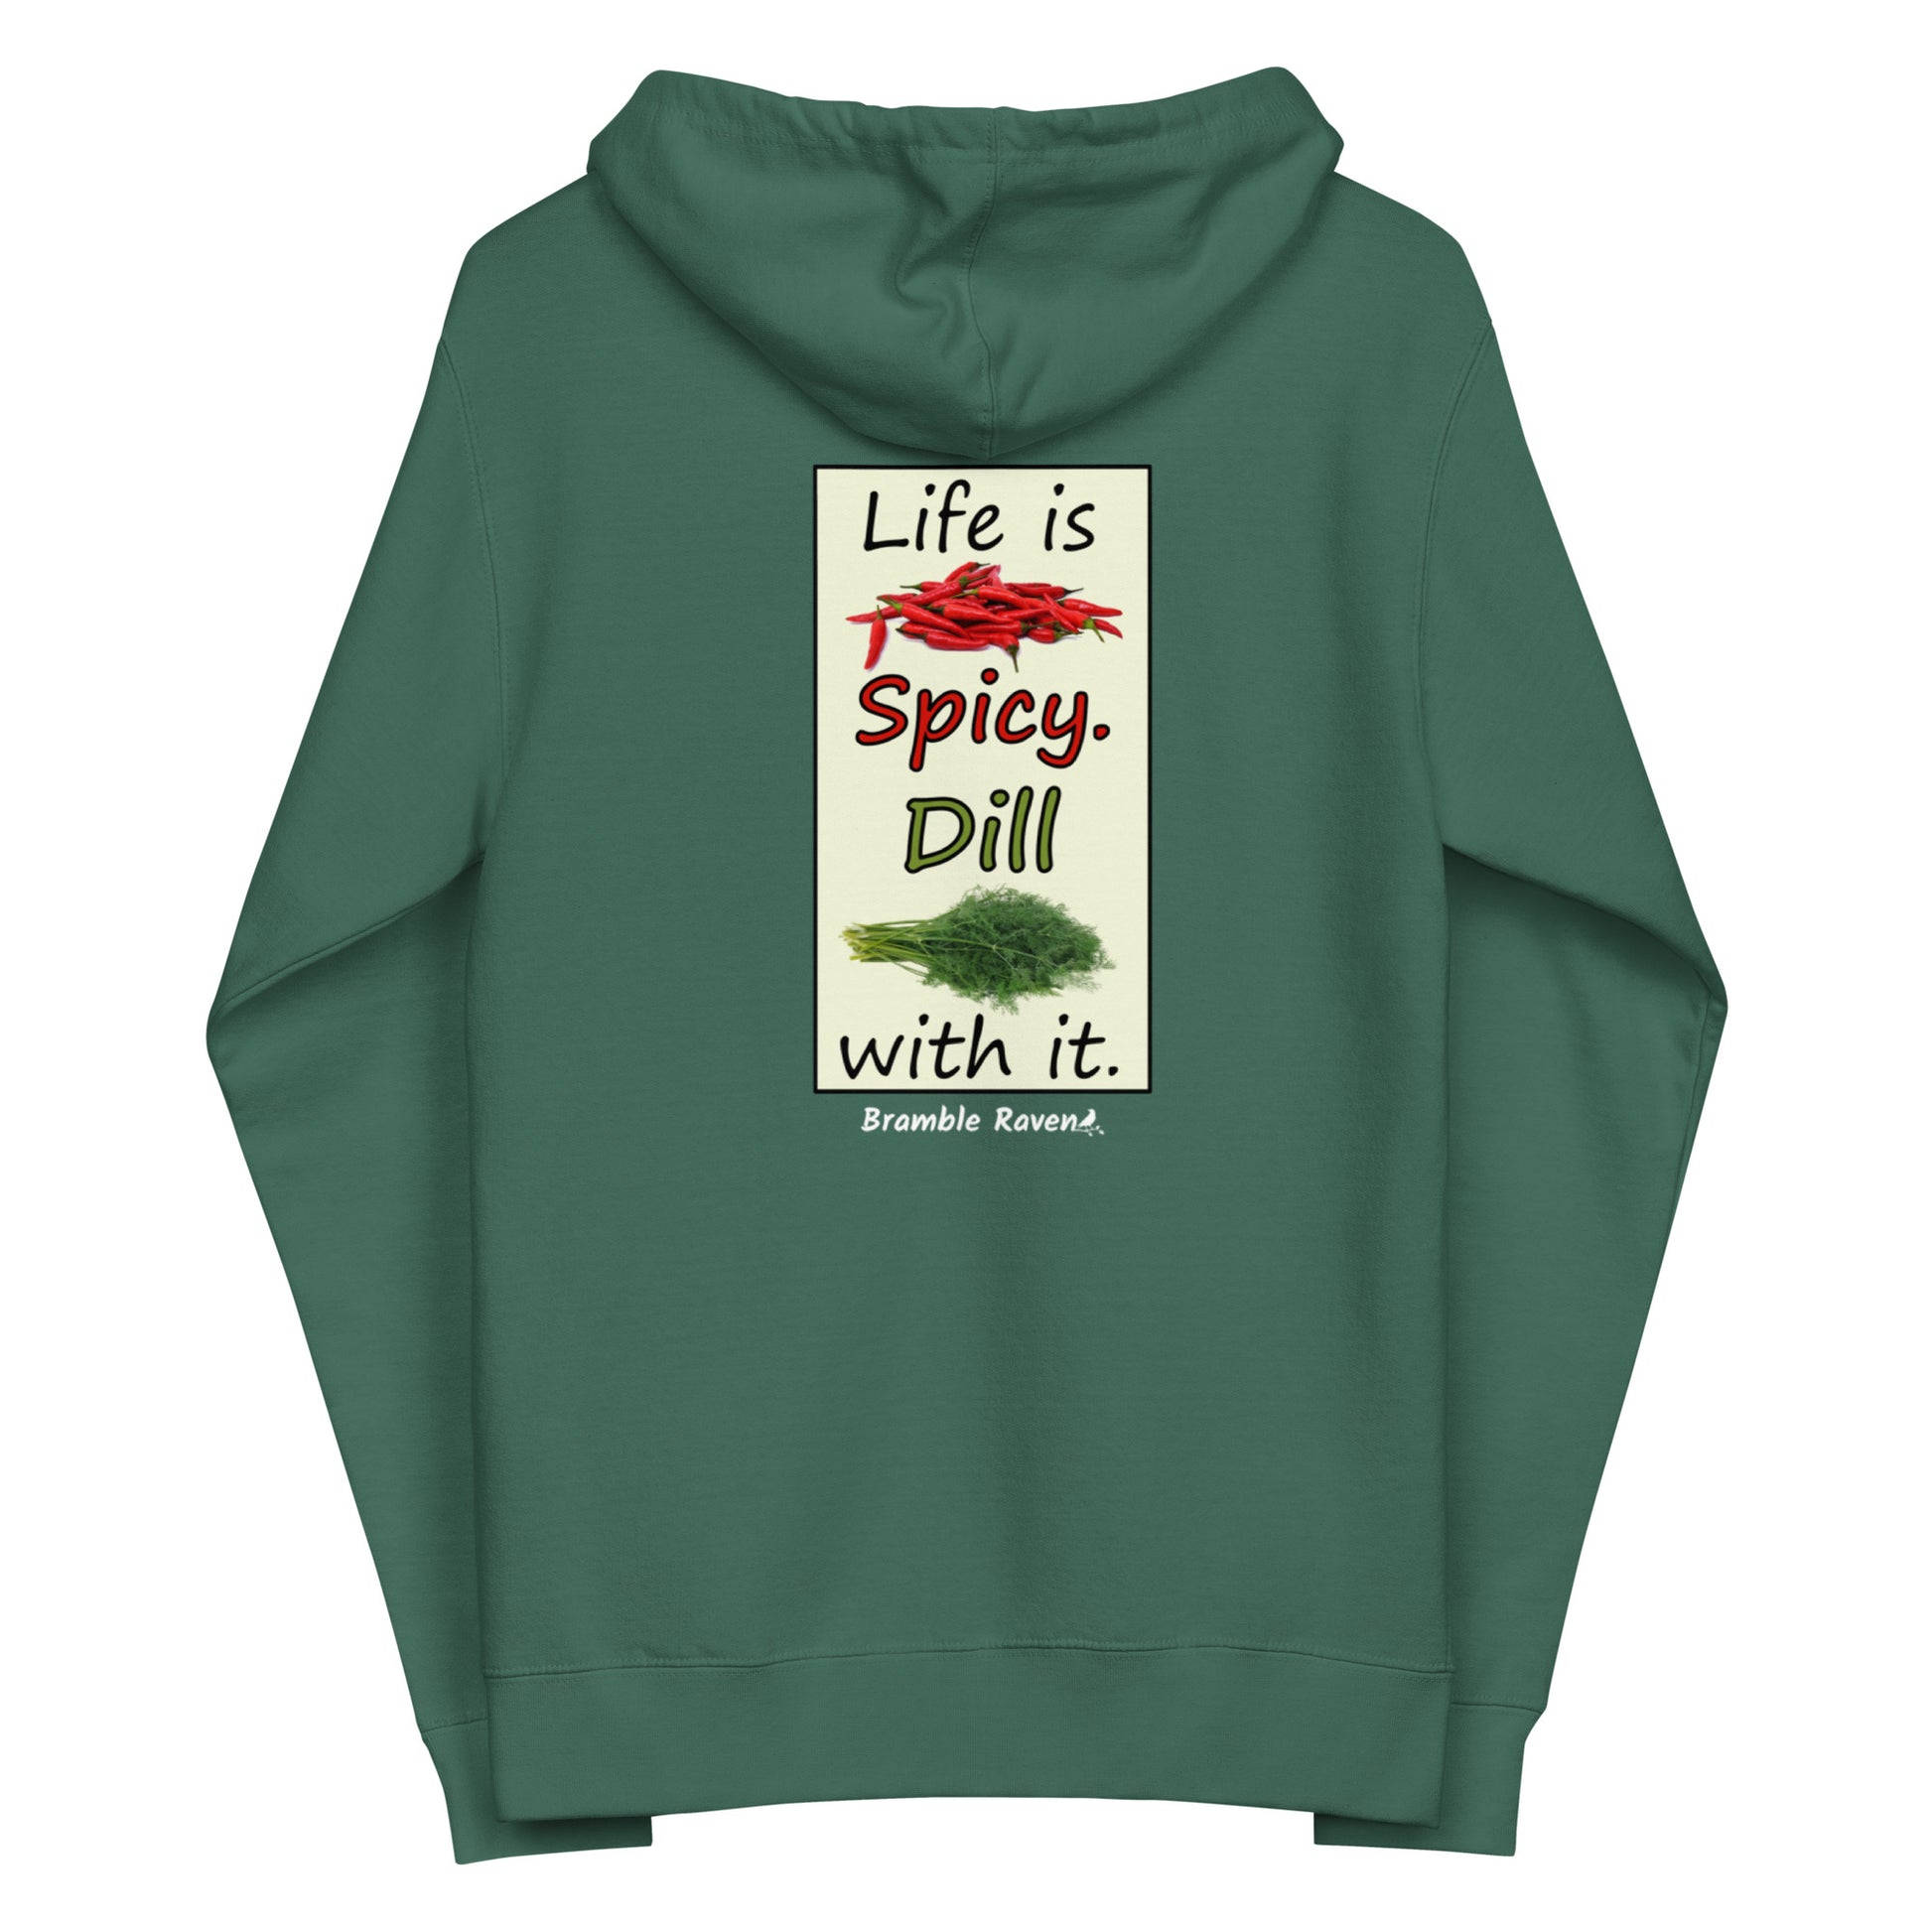 Life is spicy. Dill with it. Text with image of chili peppers and dill weed. Graphic printed on the back of unisex alpine green zip up hoodie lined with fleece.